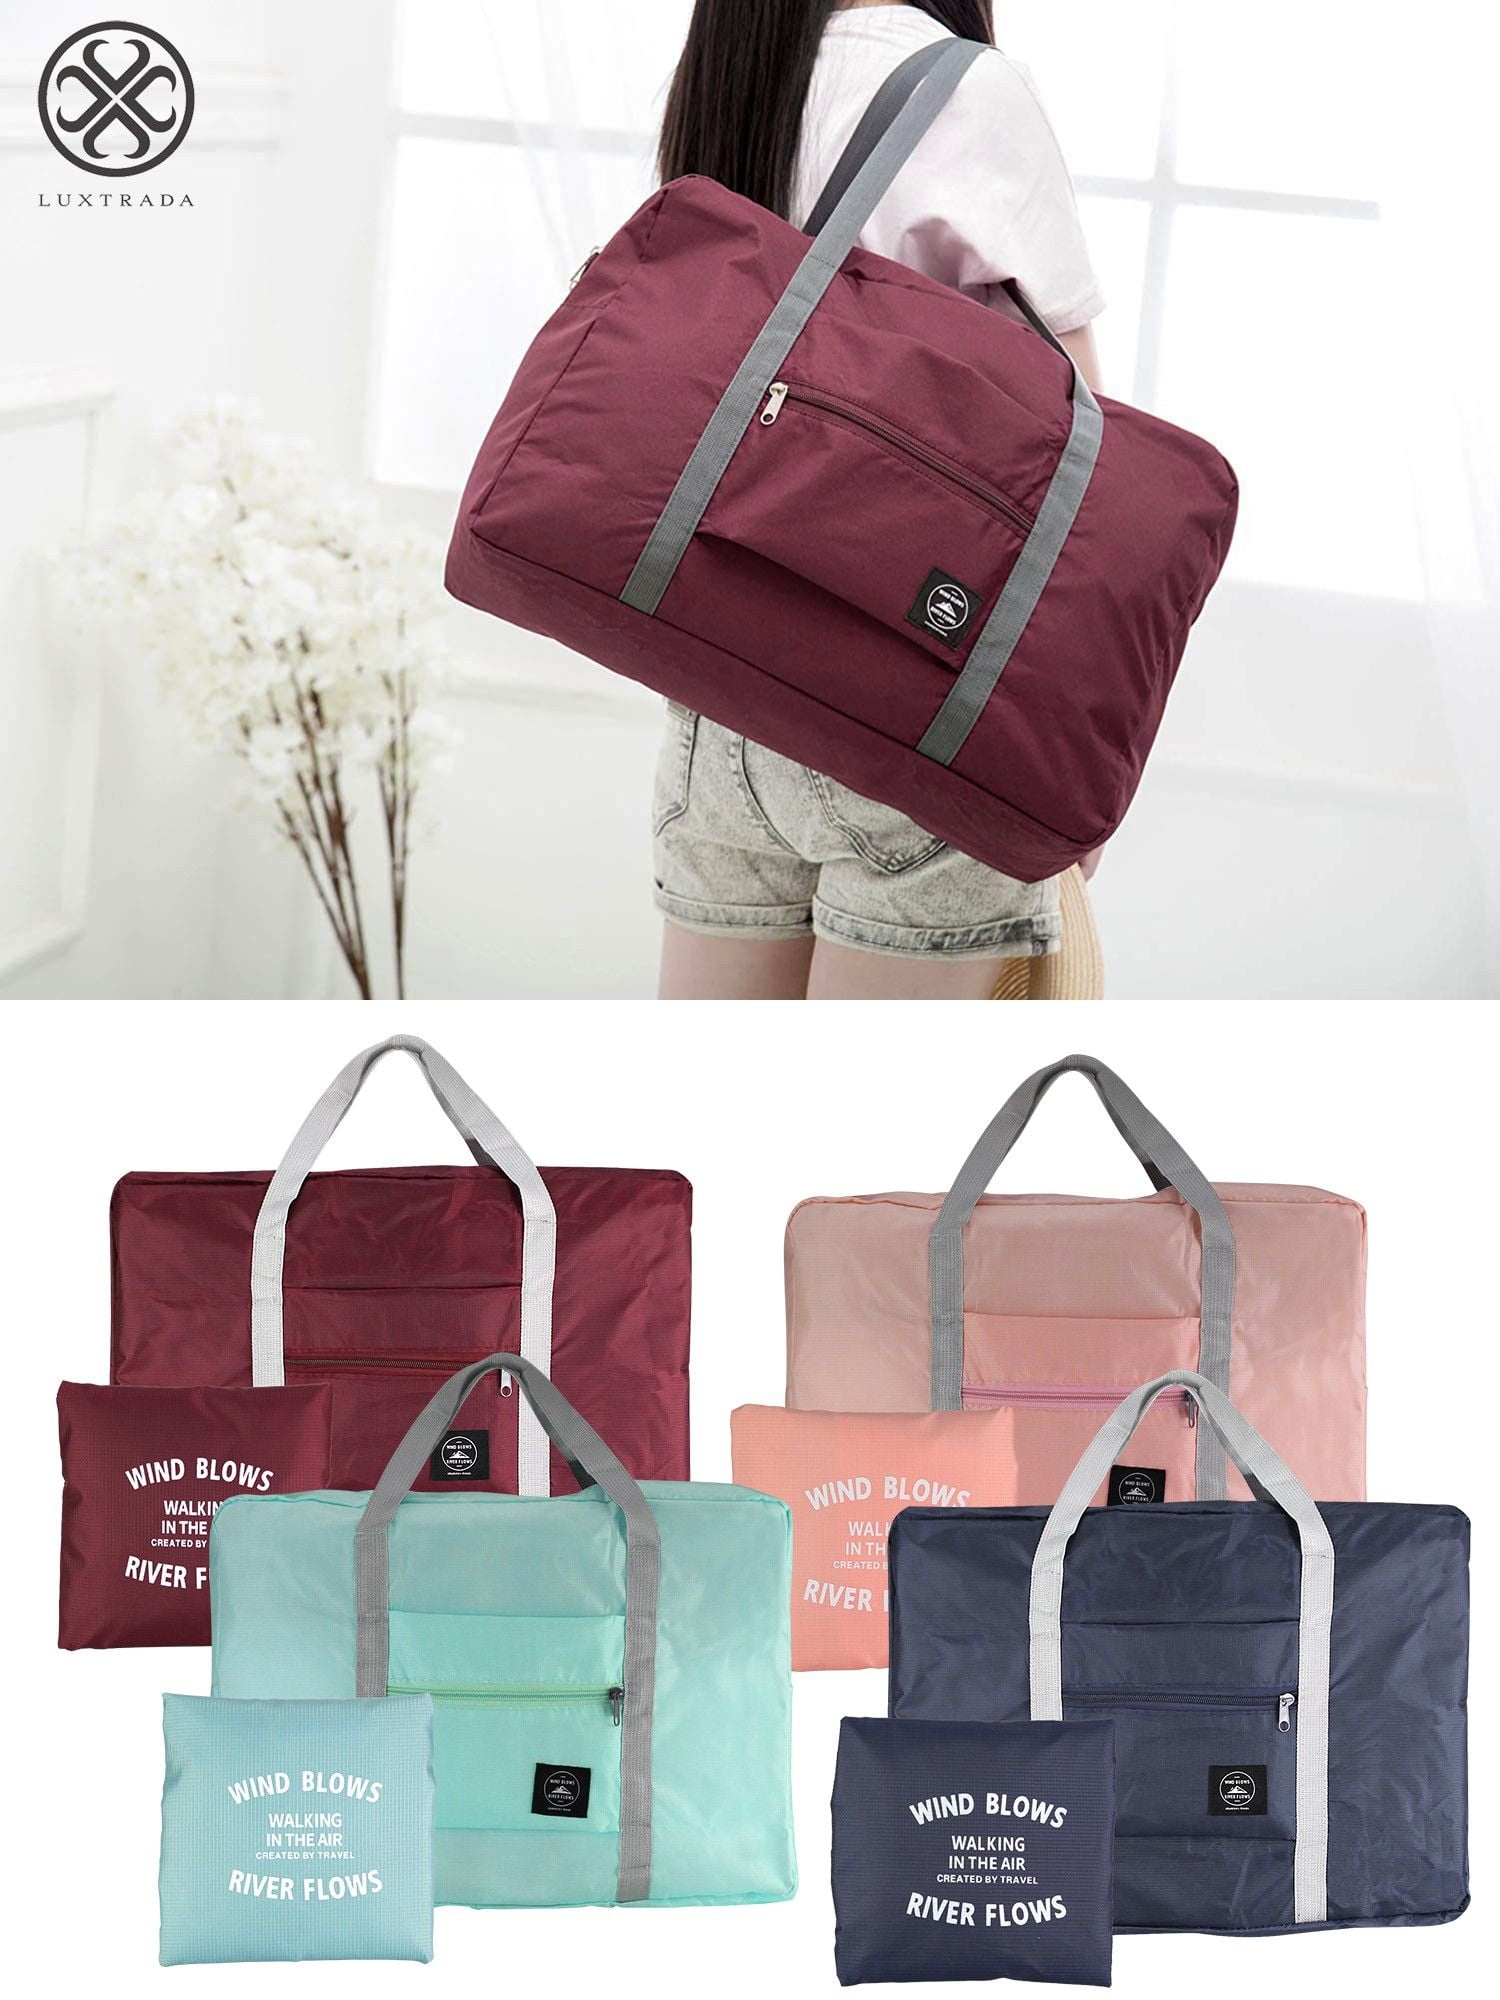 Portable Foldable Waterpoof Travel Luggage Baggage Storage Carry-On Duffle Bag 